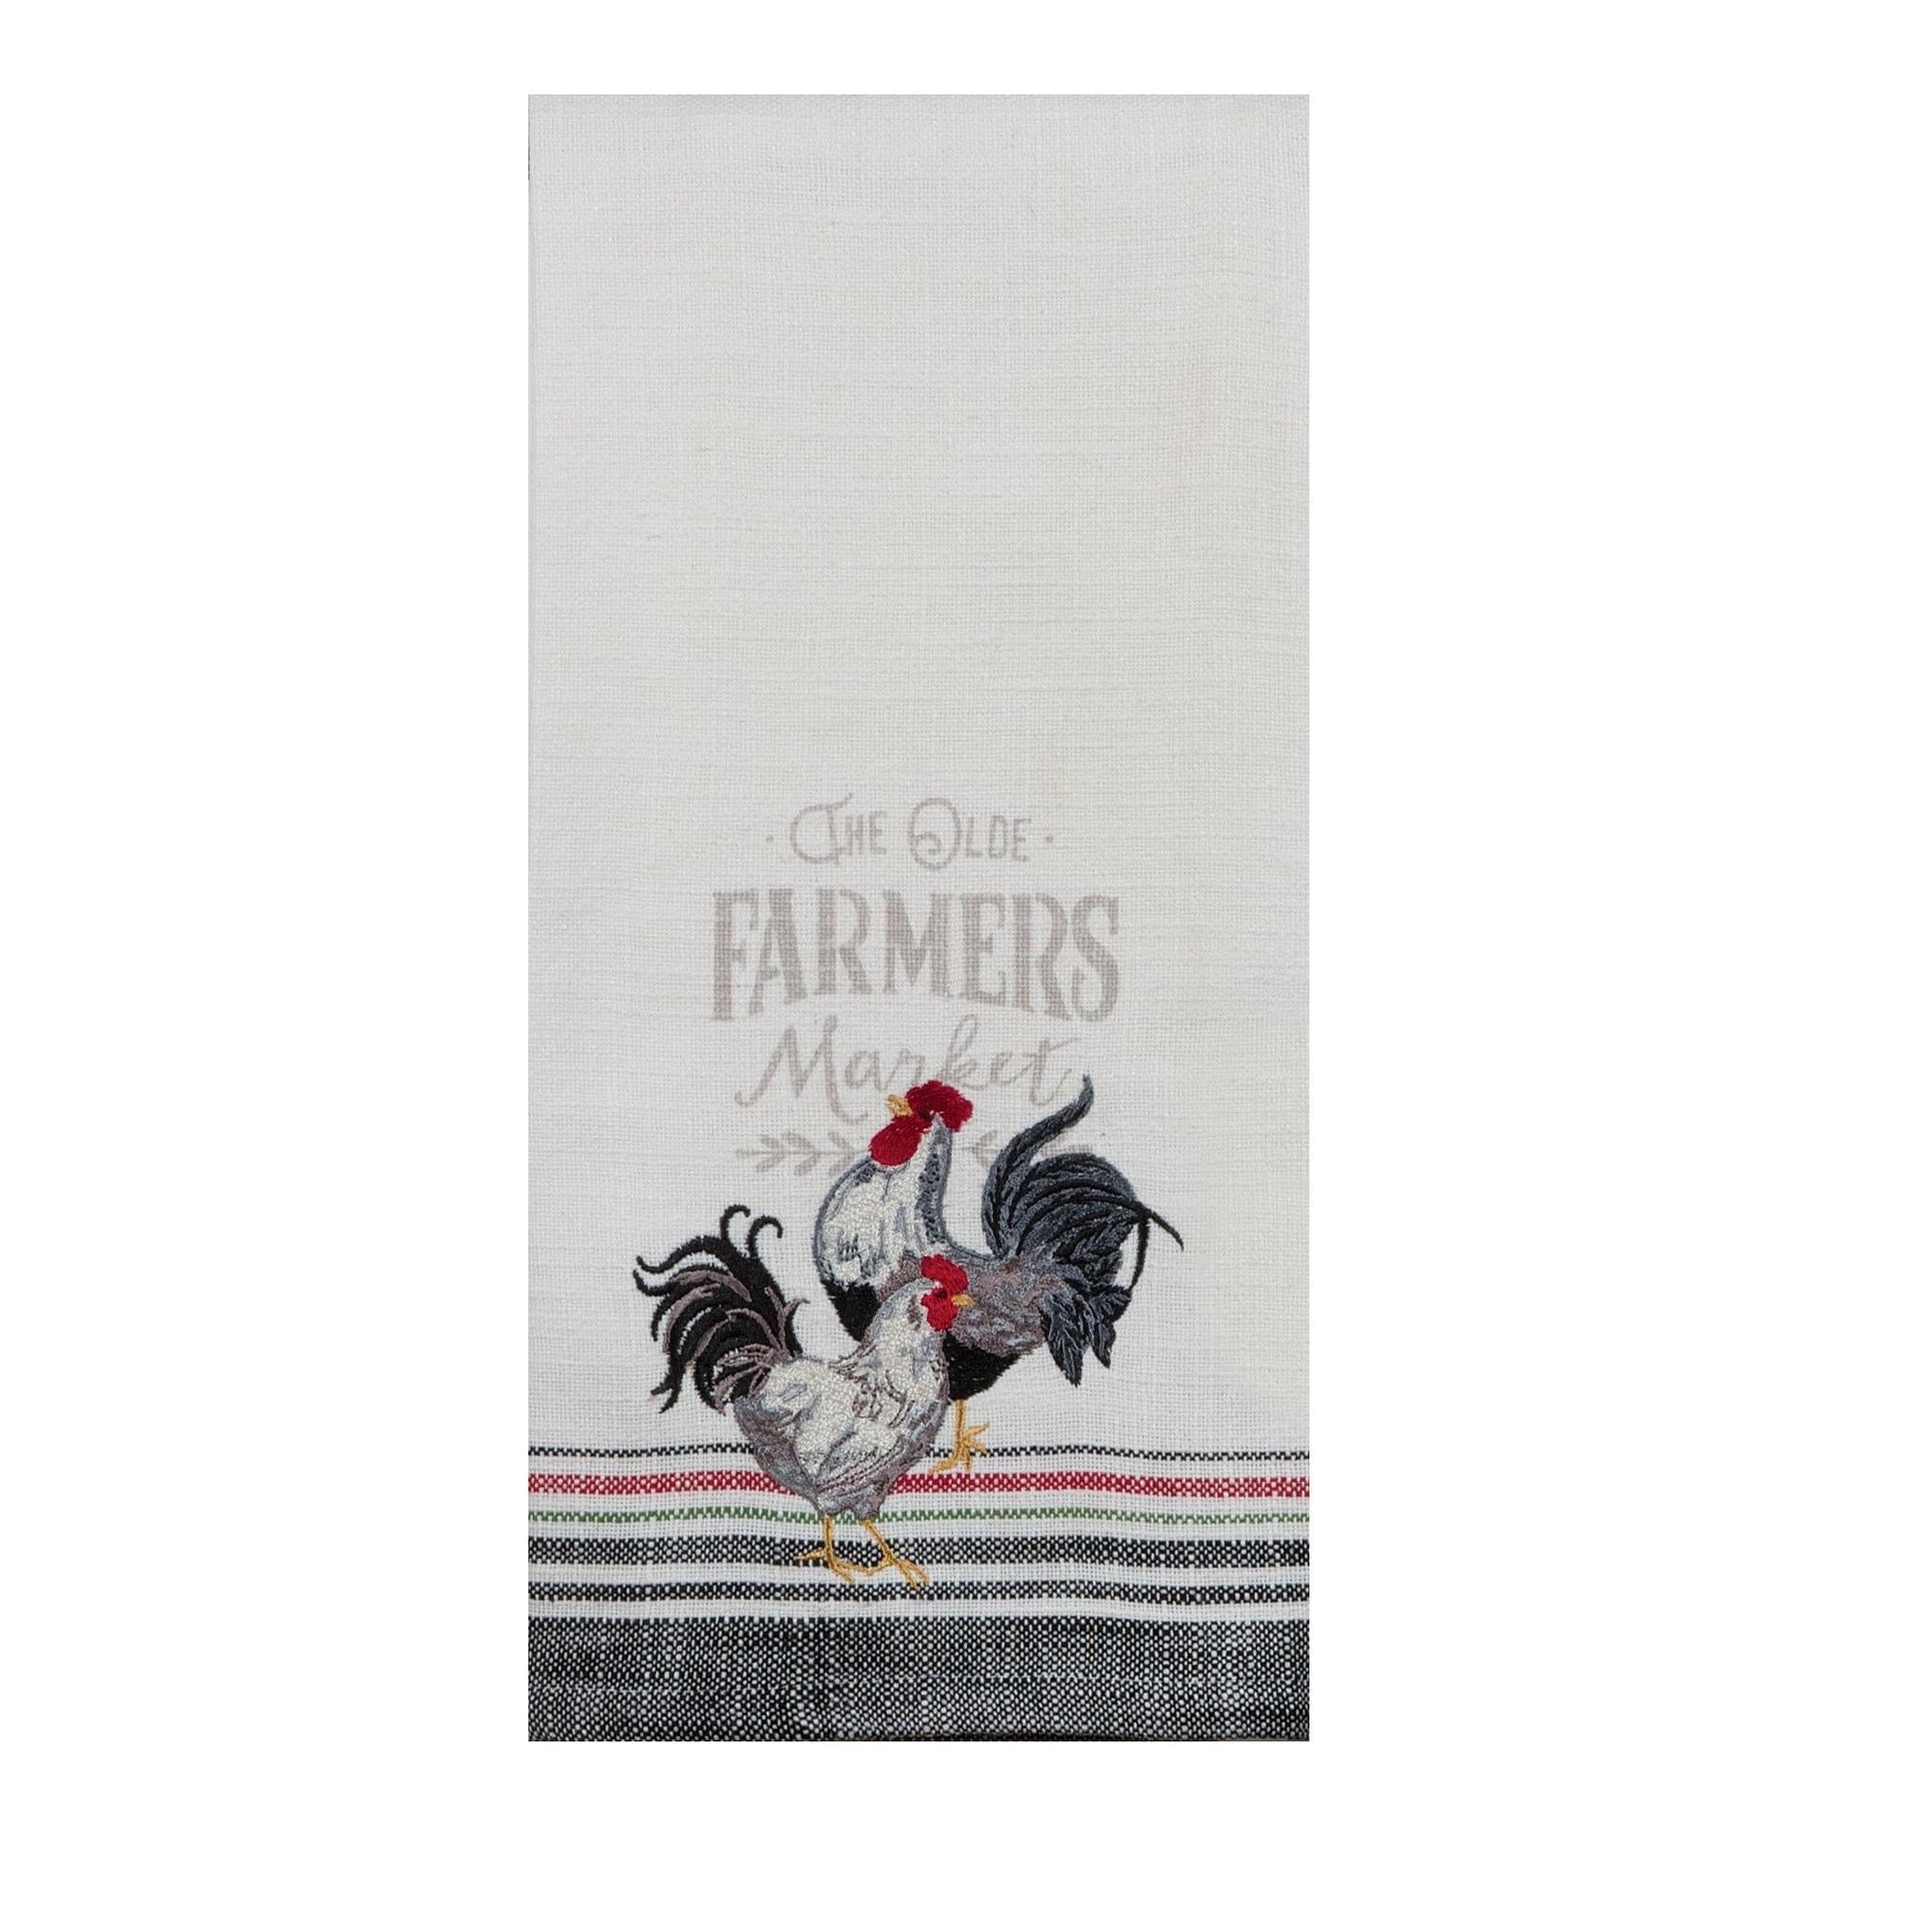 Embroidered Tea Towel "Farmer's Market" Roosters